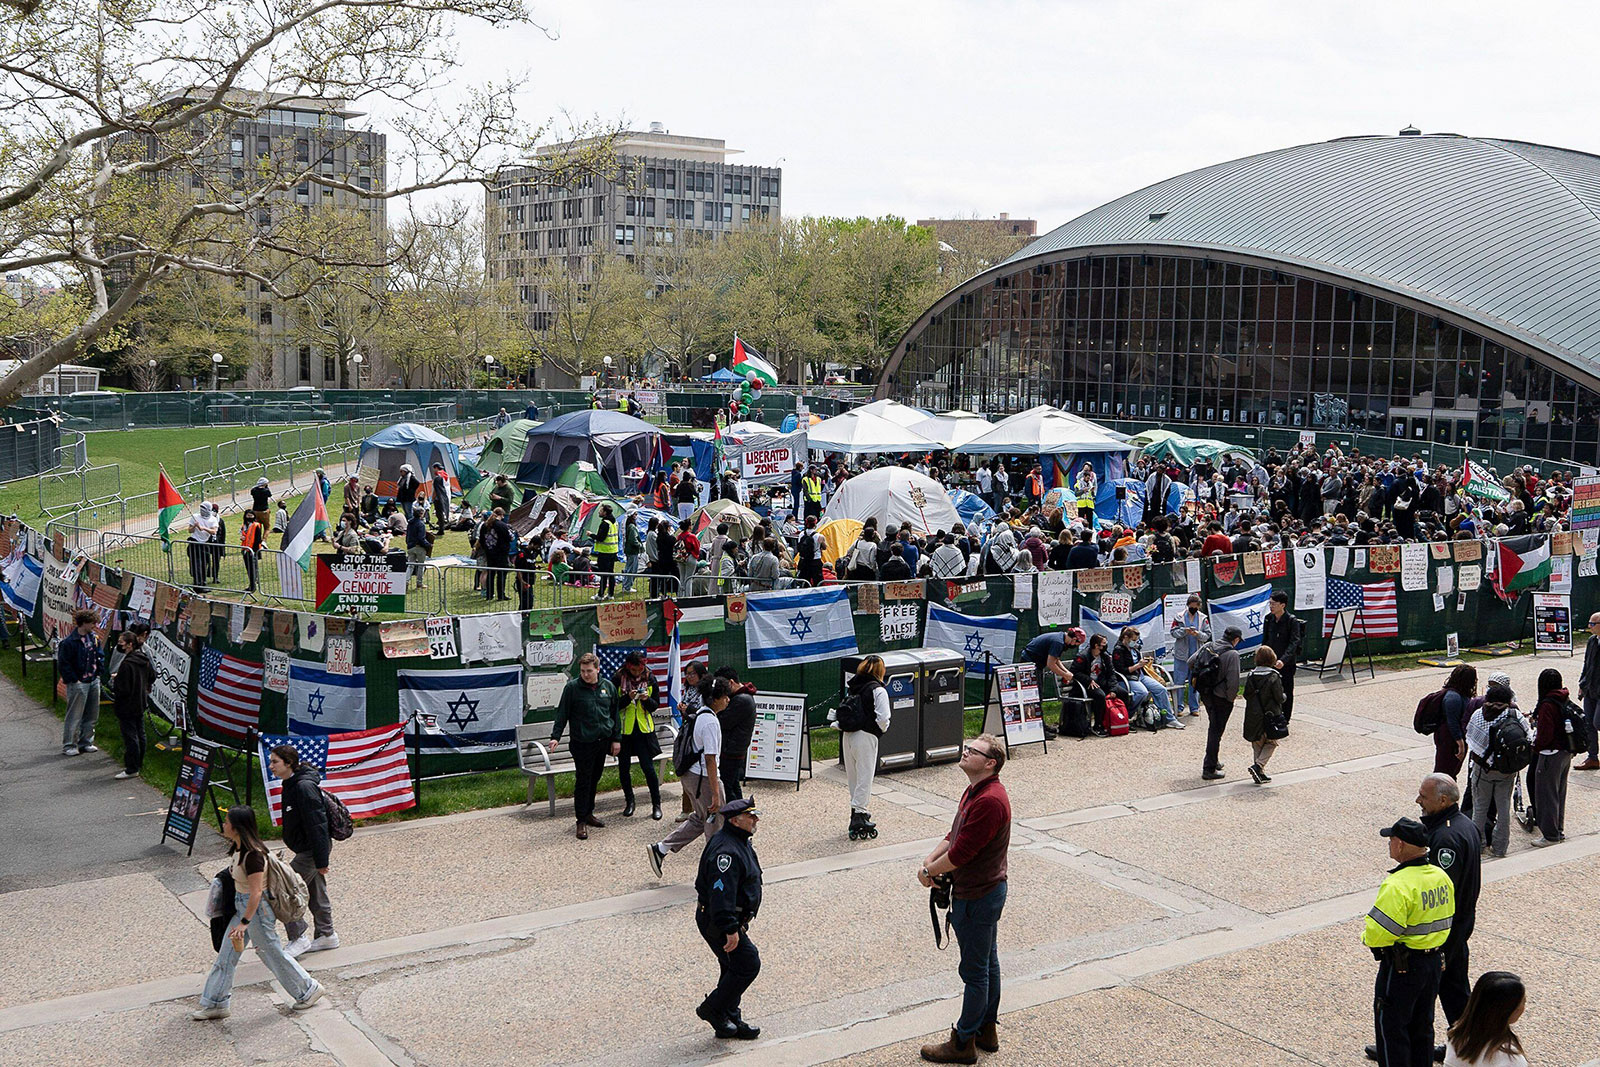 A general view of the MIT pro-Palestine emcampmenbt with metal barricades surrounding it as seen on Friday, May 3.